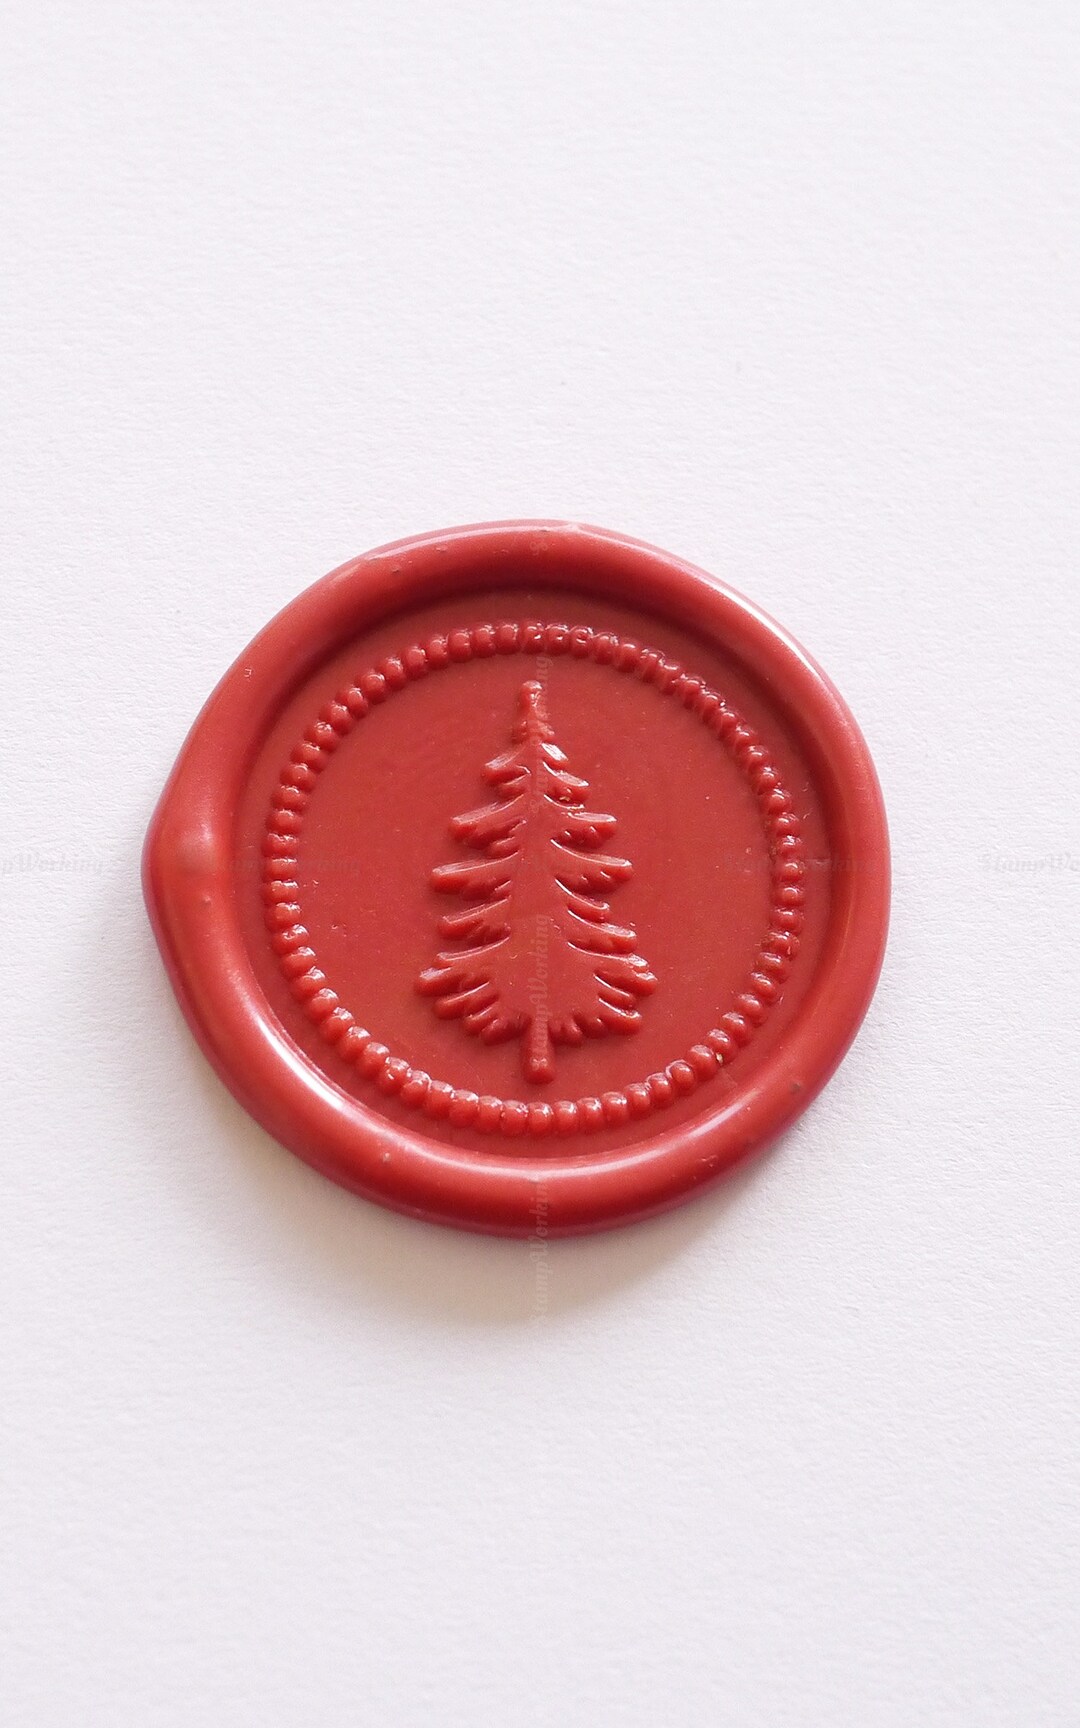 Comealltime 6pcs Christmas Wax Seal Stamp Set, Sealing Wax Copper Stamps +  1 Wooden Handle, Wax Stamp Kit (Christmas Tree,Deer,Santa Claus,Snowflakes)